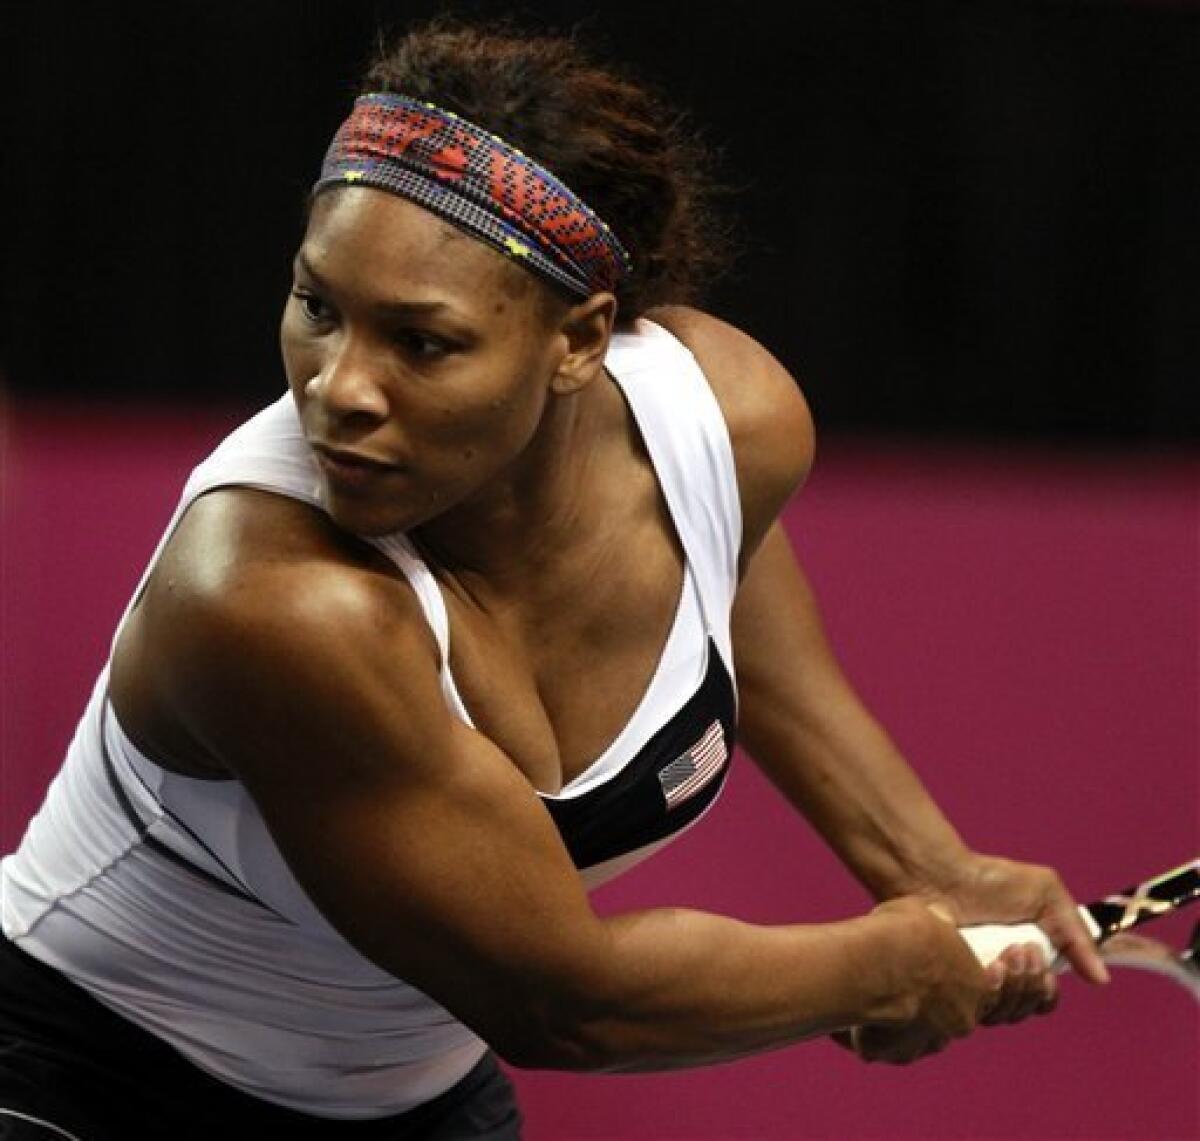 Serena Williams returns a ball to Anastasia Yakimova, of Belarus, during a first-round Fed Cup tennis match in Worcester, Mass., Sunday, Feb. 5, 2012. Williams defeated Yakimova 5-7, 6-1, 6-1. (AP Photo/Steven Senne)